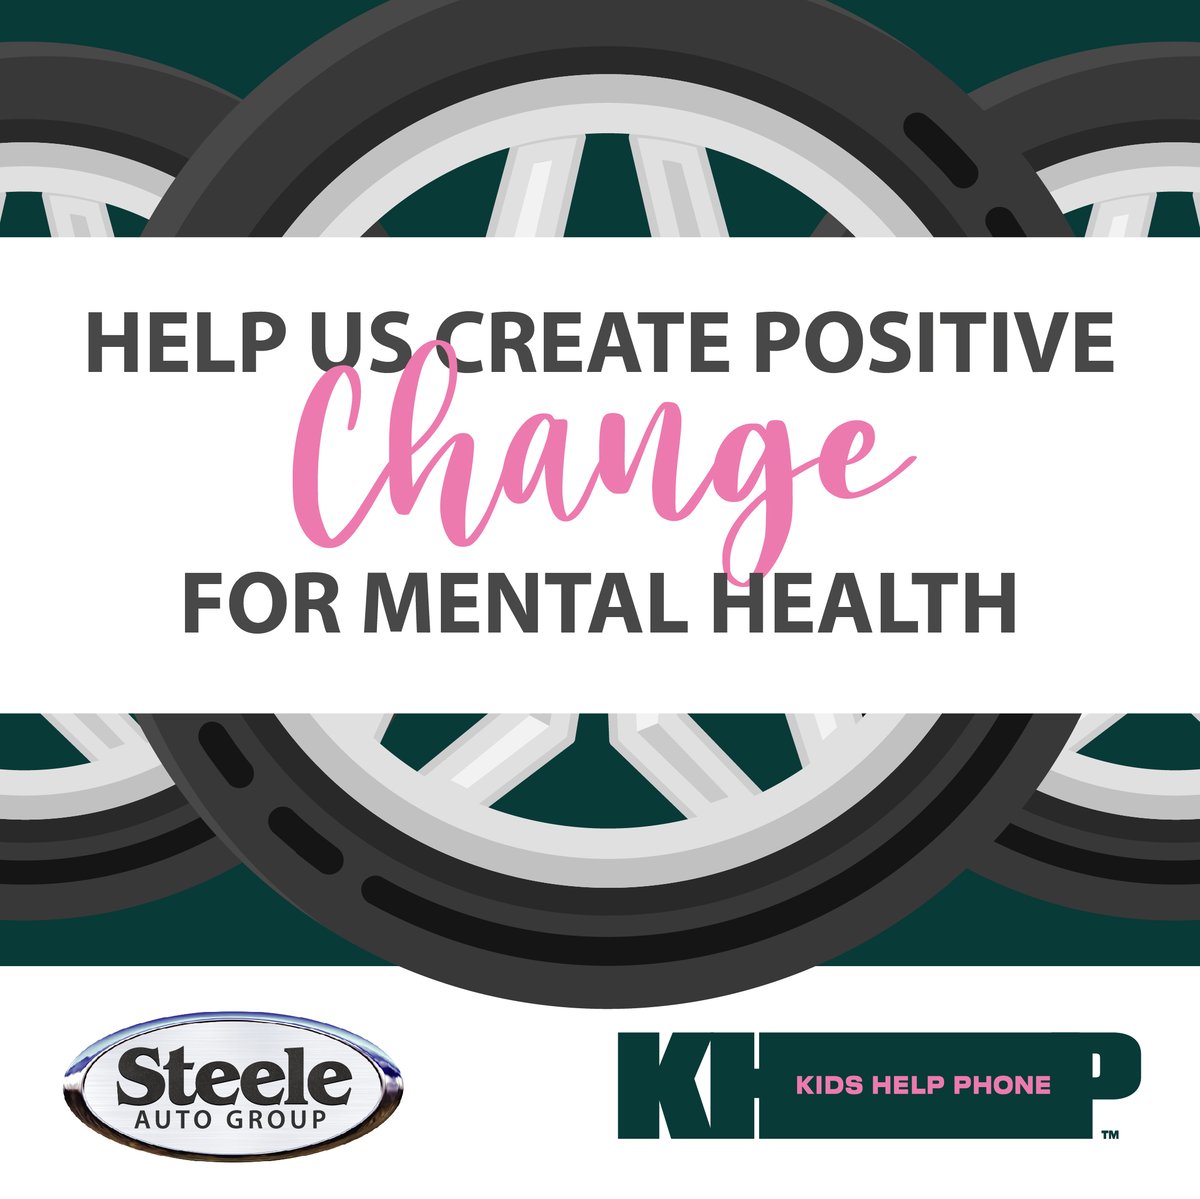 Help us create positive change for mental health!

With every tire change from now until the end of May, Steele Auto will make a donation to Kids Help Phone. 

steeleauto.com/service/schedu…

#kidshelpphone #whysteeleauto #steeleautogroup #steelegivesback #yourwayauto #yourcaryourway